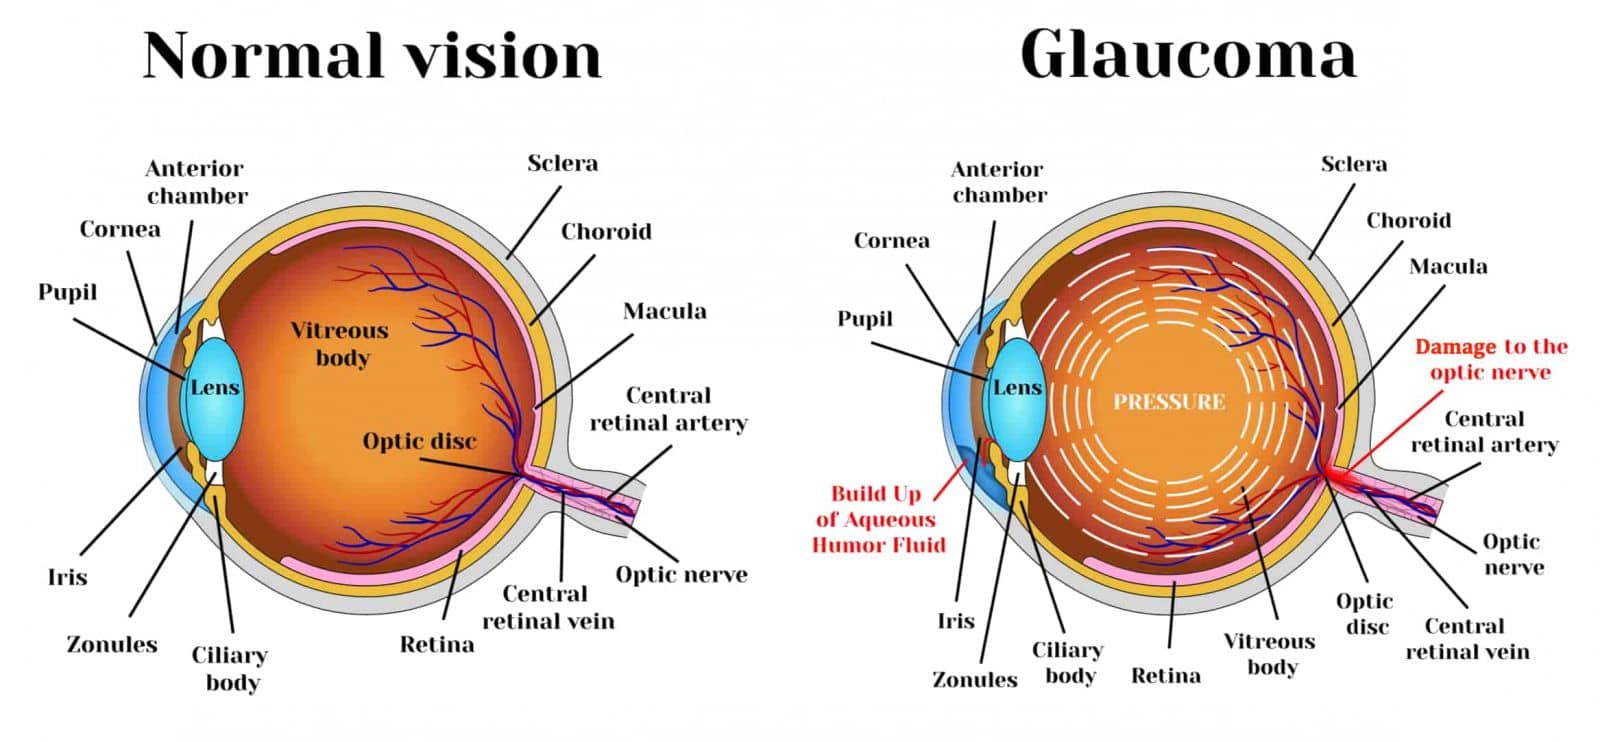 a visual showing the differences between normal vision and glaucoma